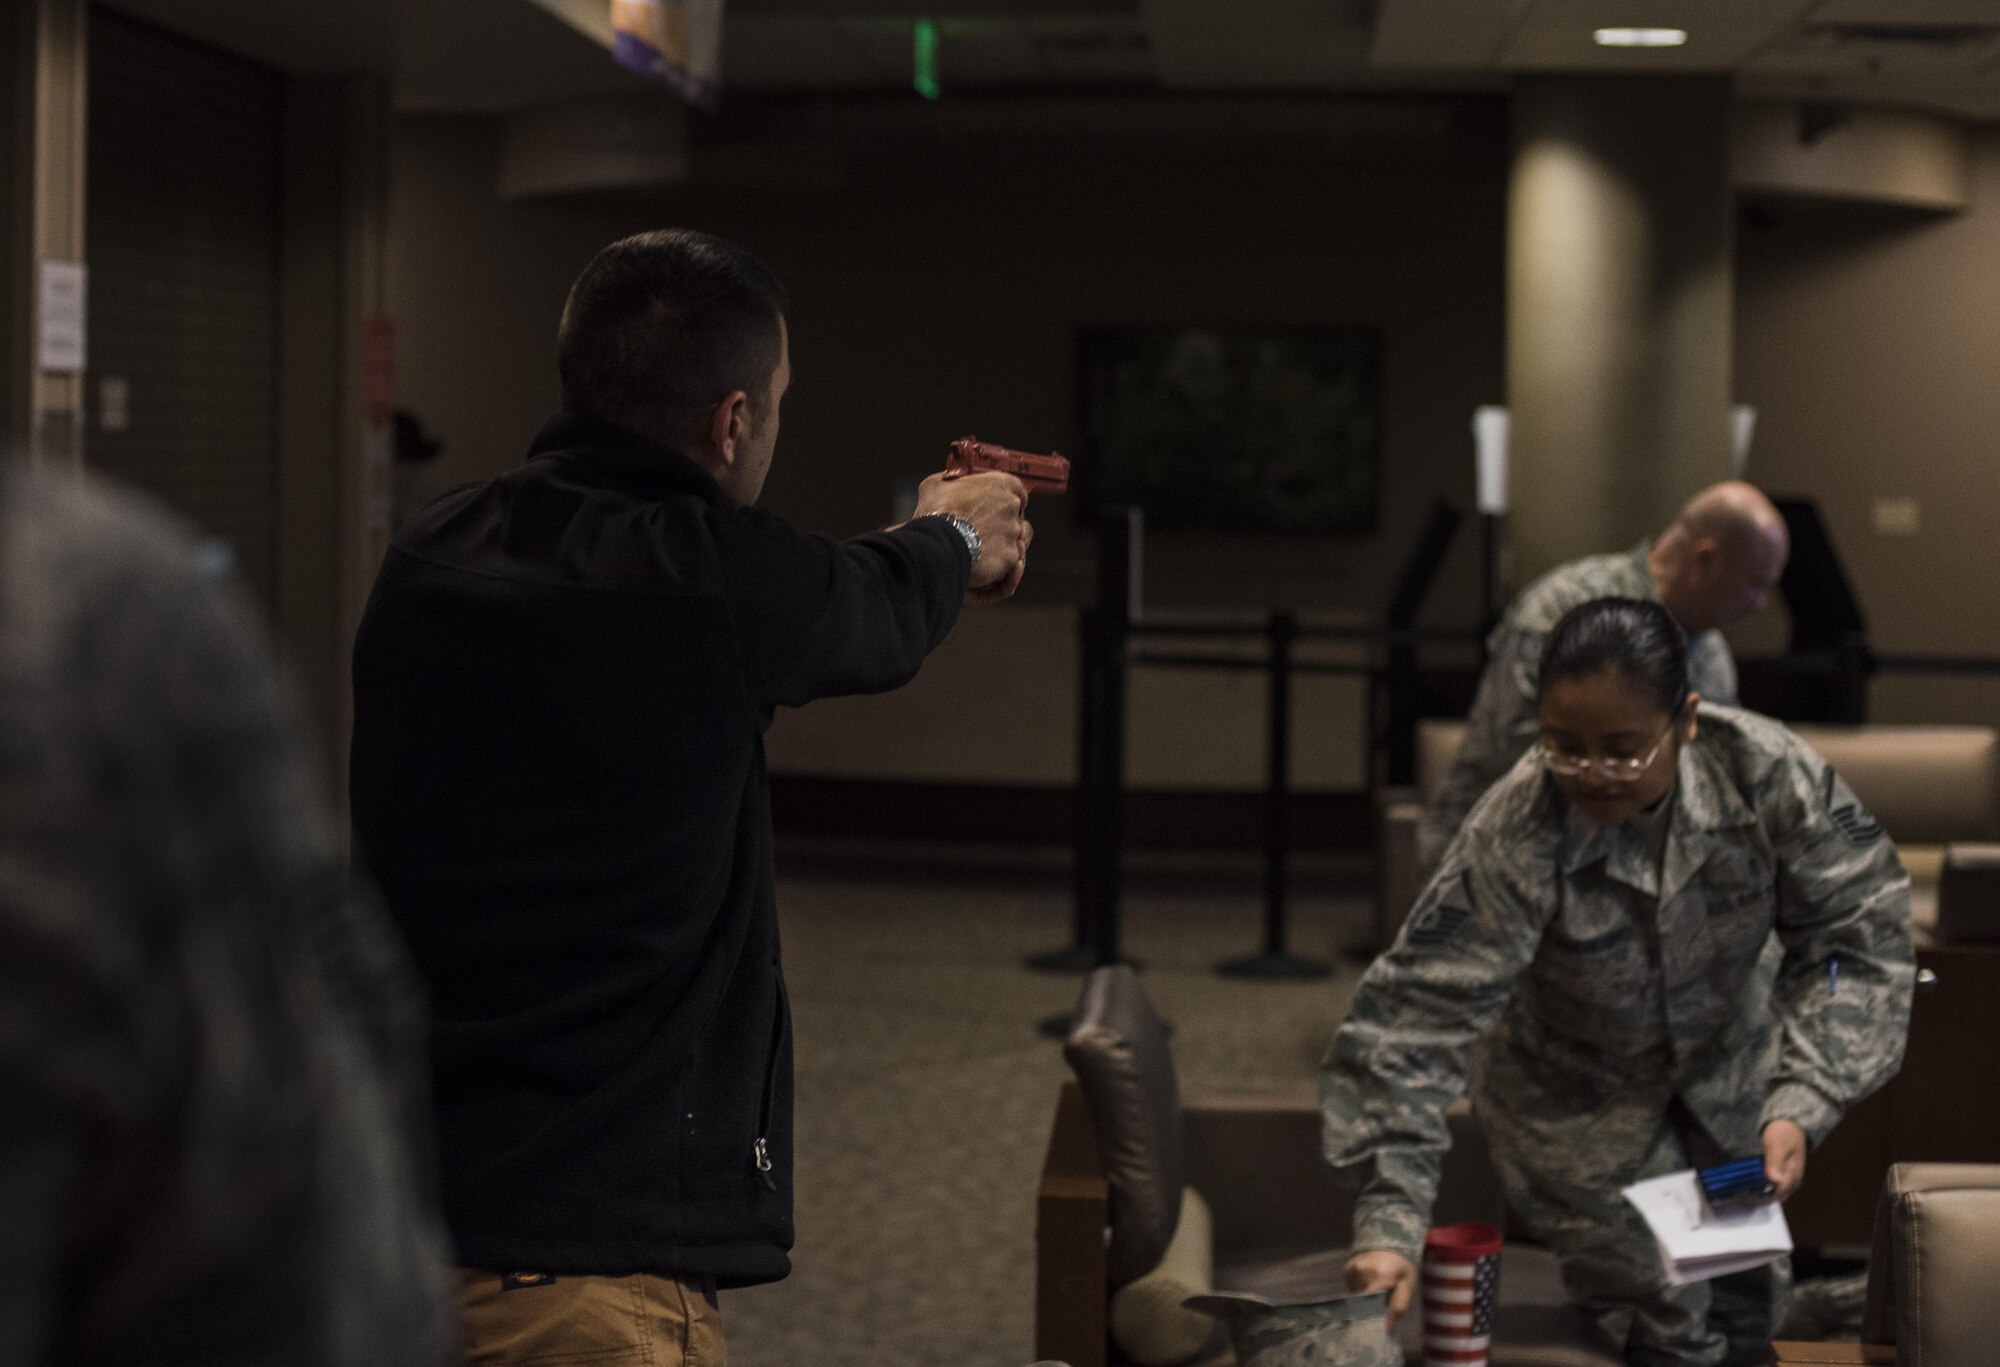 Master Sgt. Jeremy Utphall, 2nd Bomb Wing Inspector General exercise division superintendent, aims a training weapon at Airmen during an active shooter exercise at Barksdale Air Force Base, La., Nov. 29, 2016. Like an actual active shooter incident, Airmen weren’t given a warning. While some were caught off guard, others implemented their training and avoided Utphall as he searched the medical building for victimes. (U.S. Air Force photo/Senior Airman Damon Kasberg)